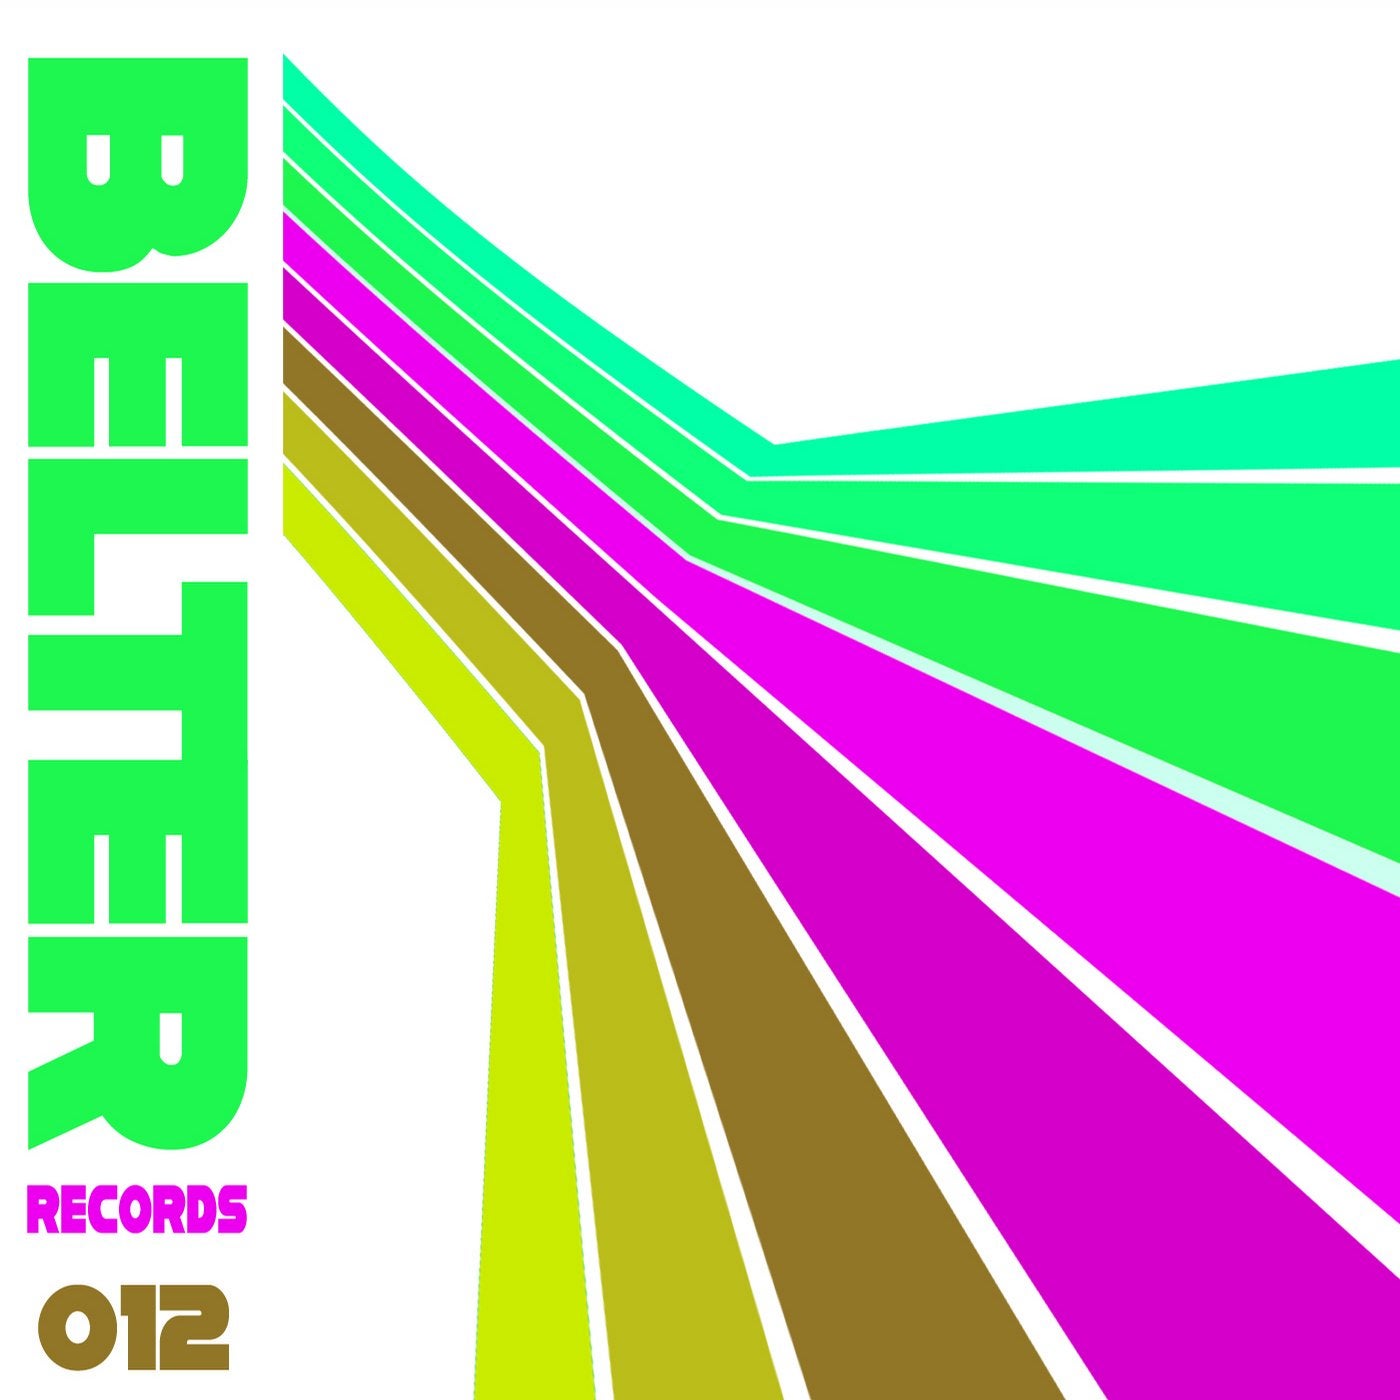 Belter Records 012